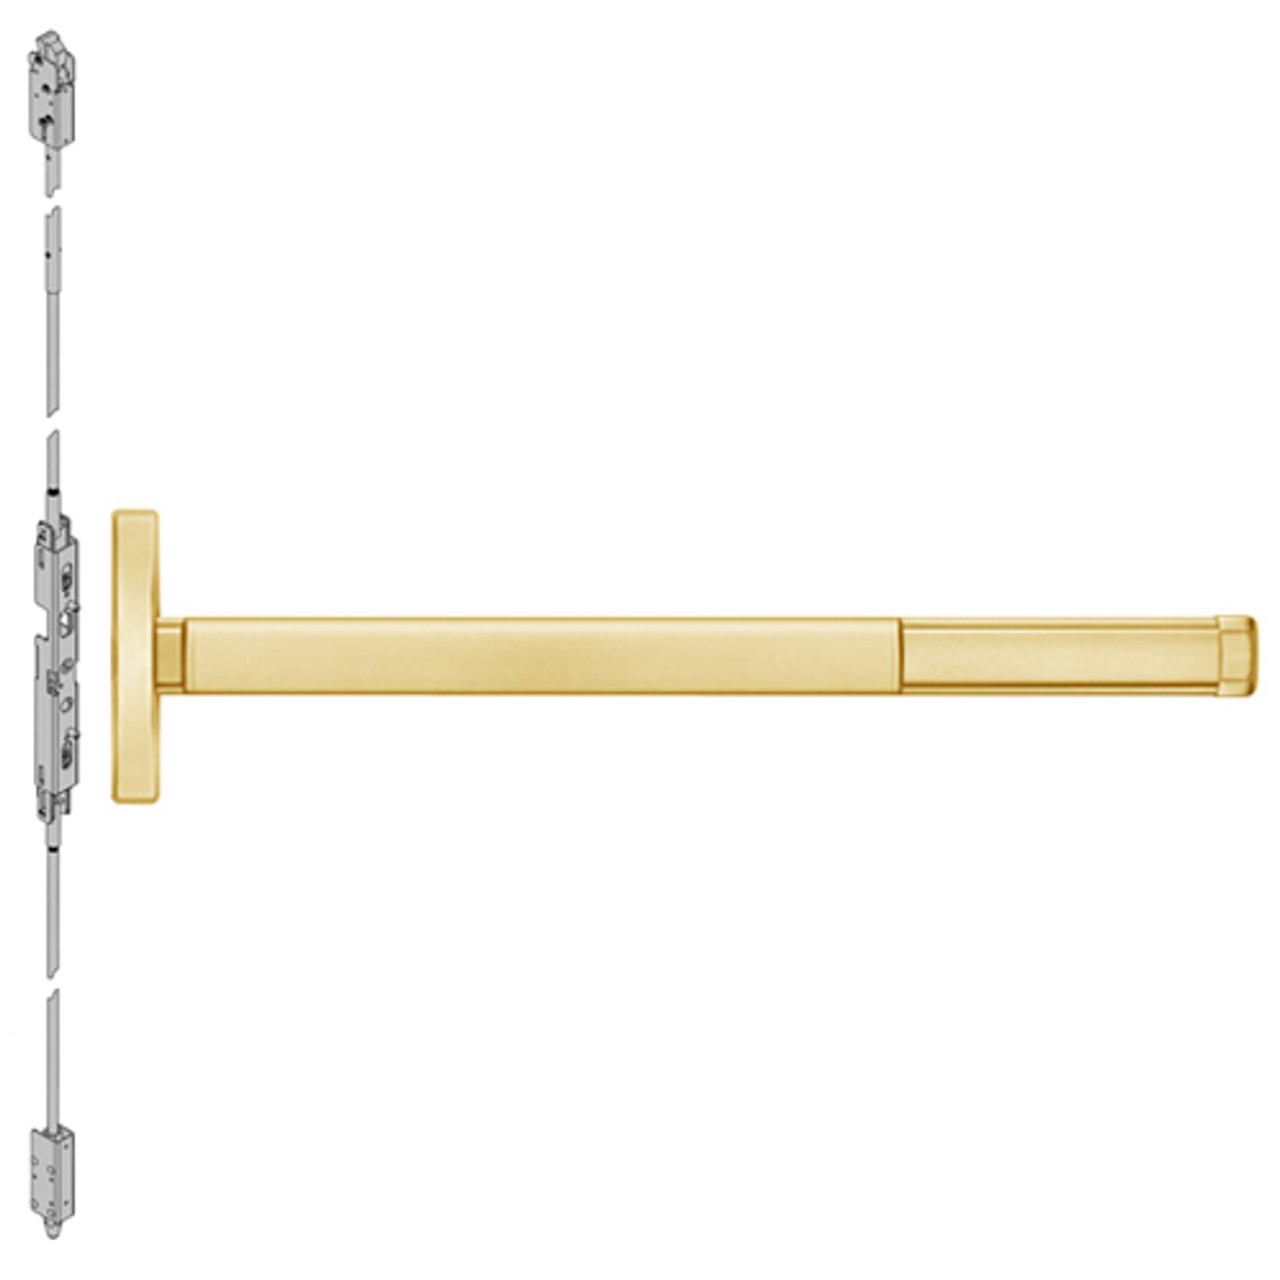 MLRFL2614-605-48 PHI 2600 Series Fire Rated Concealed Vertical Rod Exit Device with Motorized Latch Retraction Prepped for Lever Always Active in Bright Brass Finish